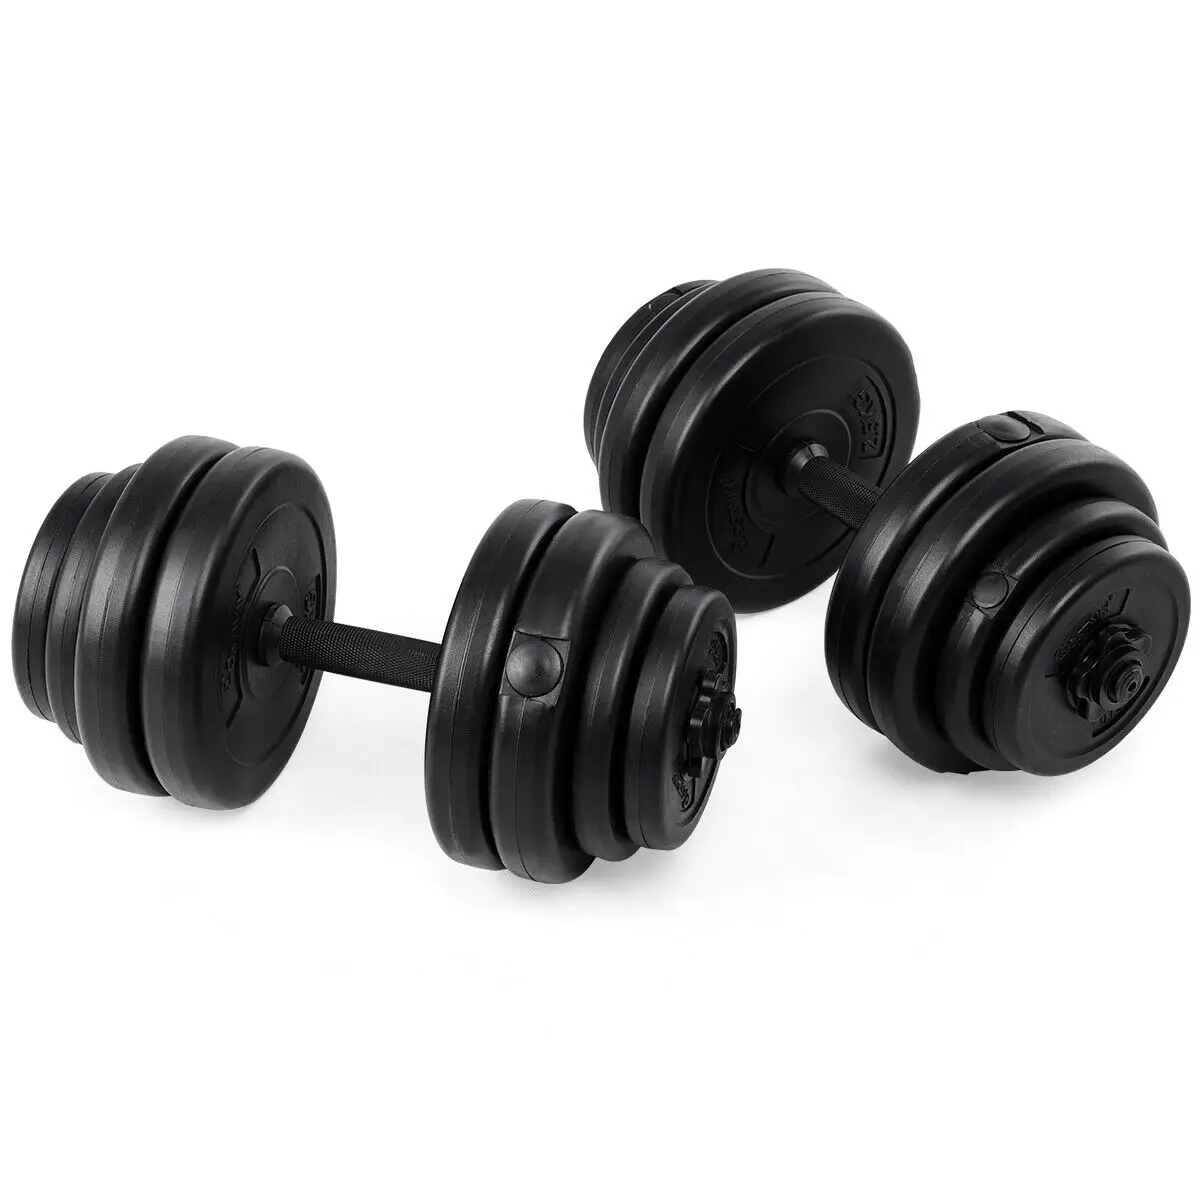 Your dumbbells have always been a staple and the essential tool